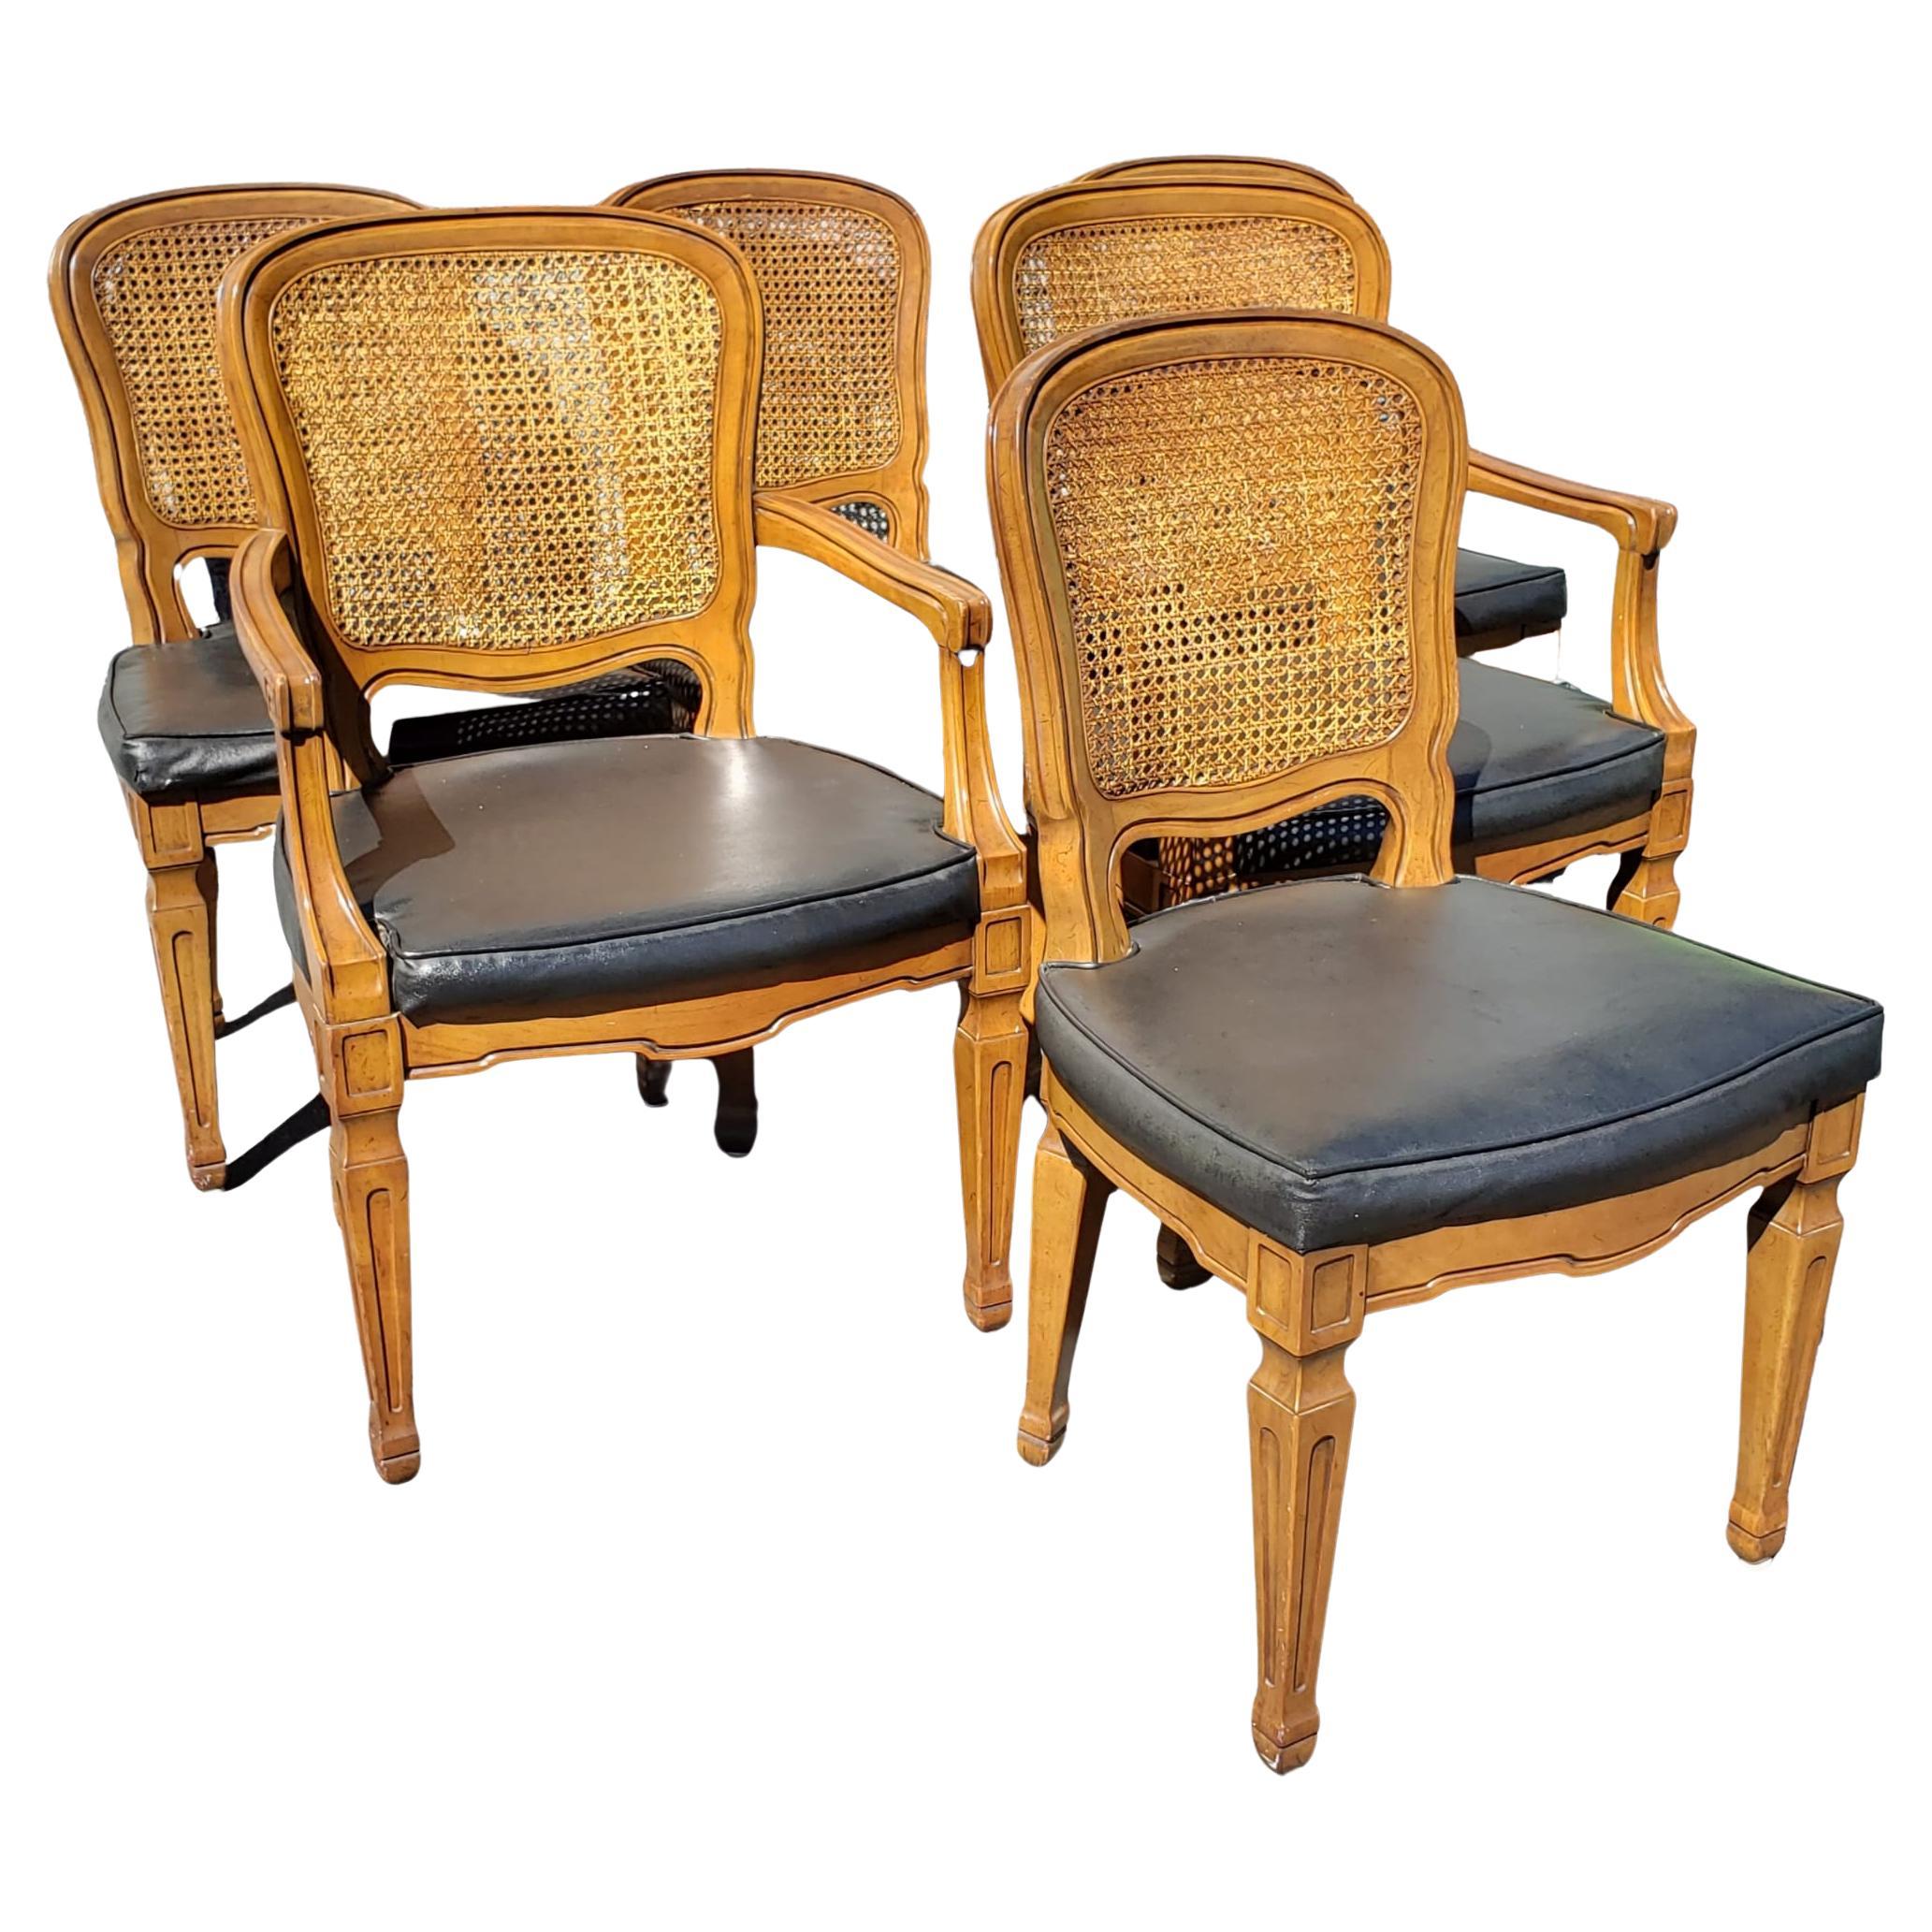 Rare Vintage French cane back dining chairs with leatherette seats by Henredon.
Faux leather seats in good condition as well as caning work. 
Side chairs measure 20.5